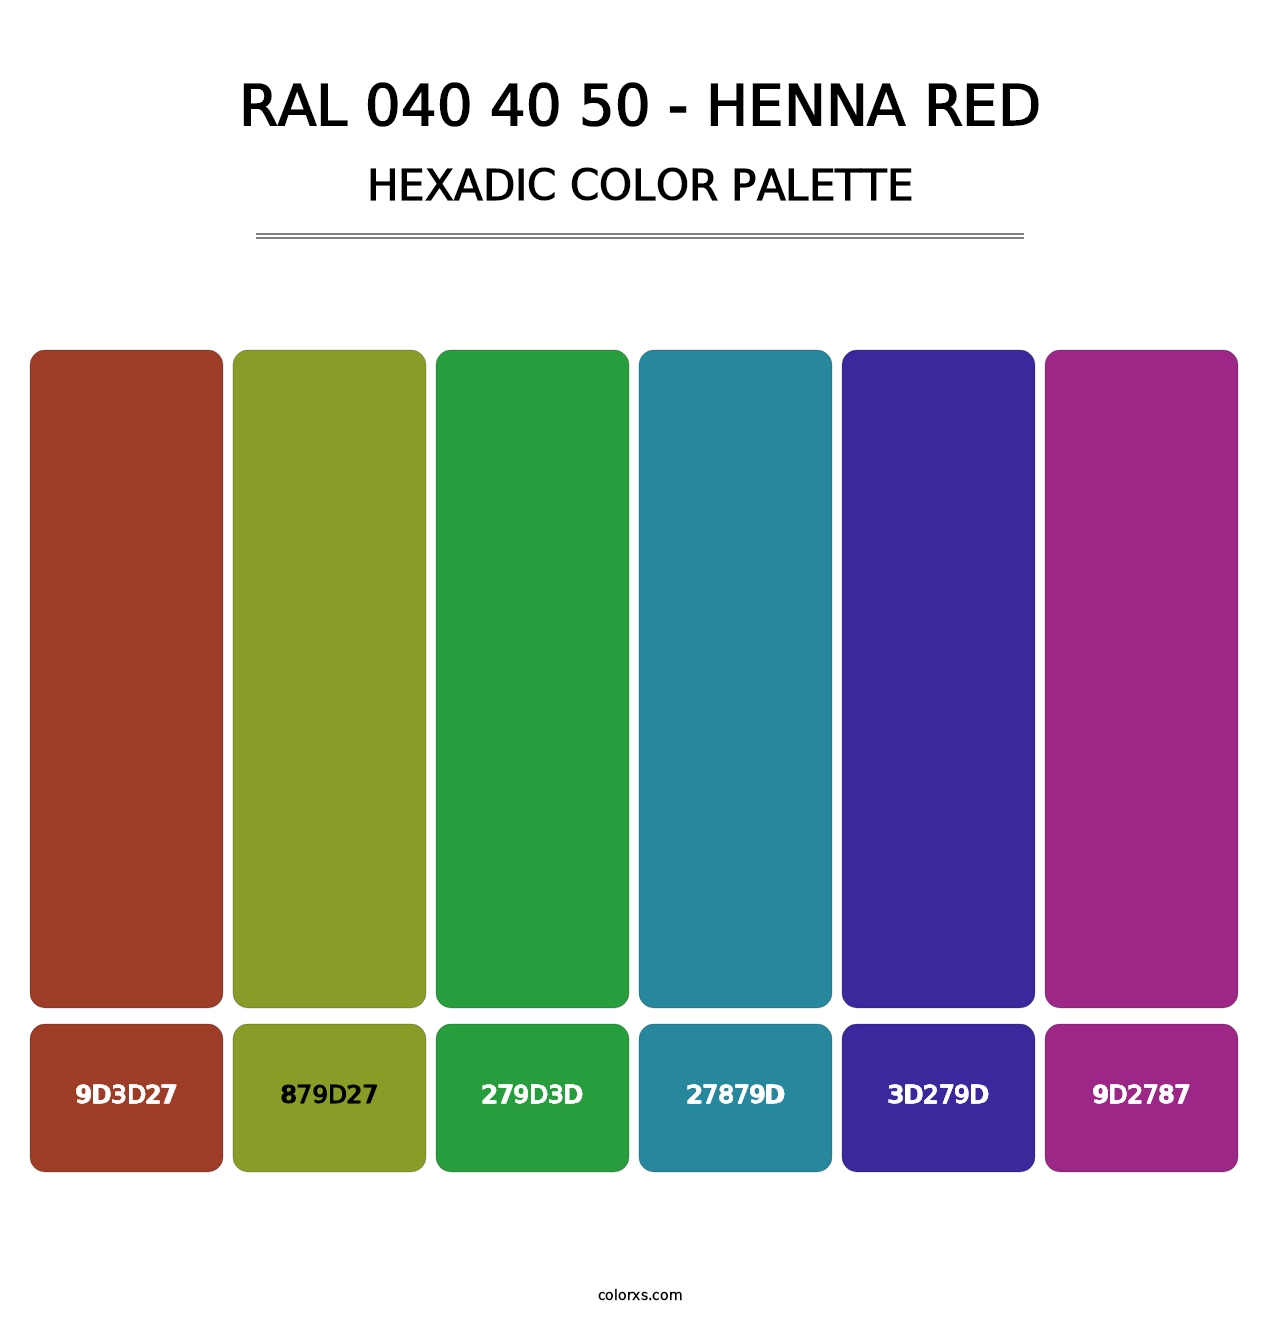 RAL 040 40 50 - Henna Red - Hexadic Color Palette